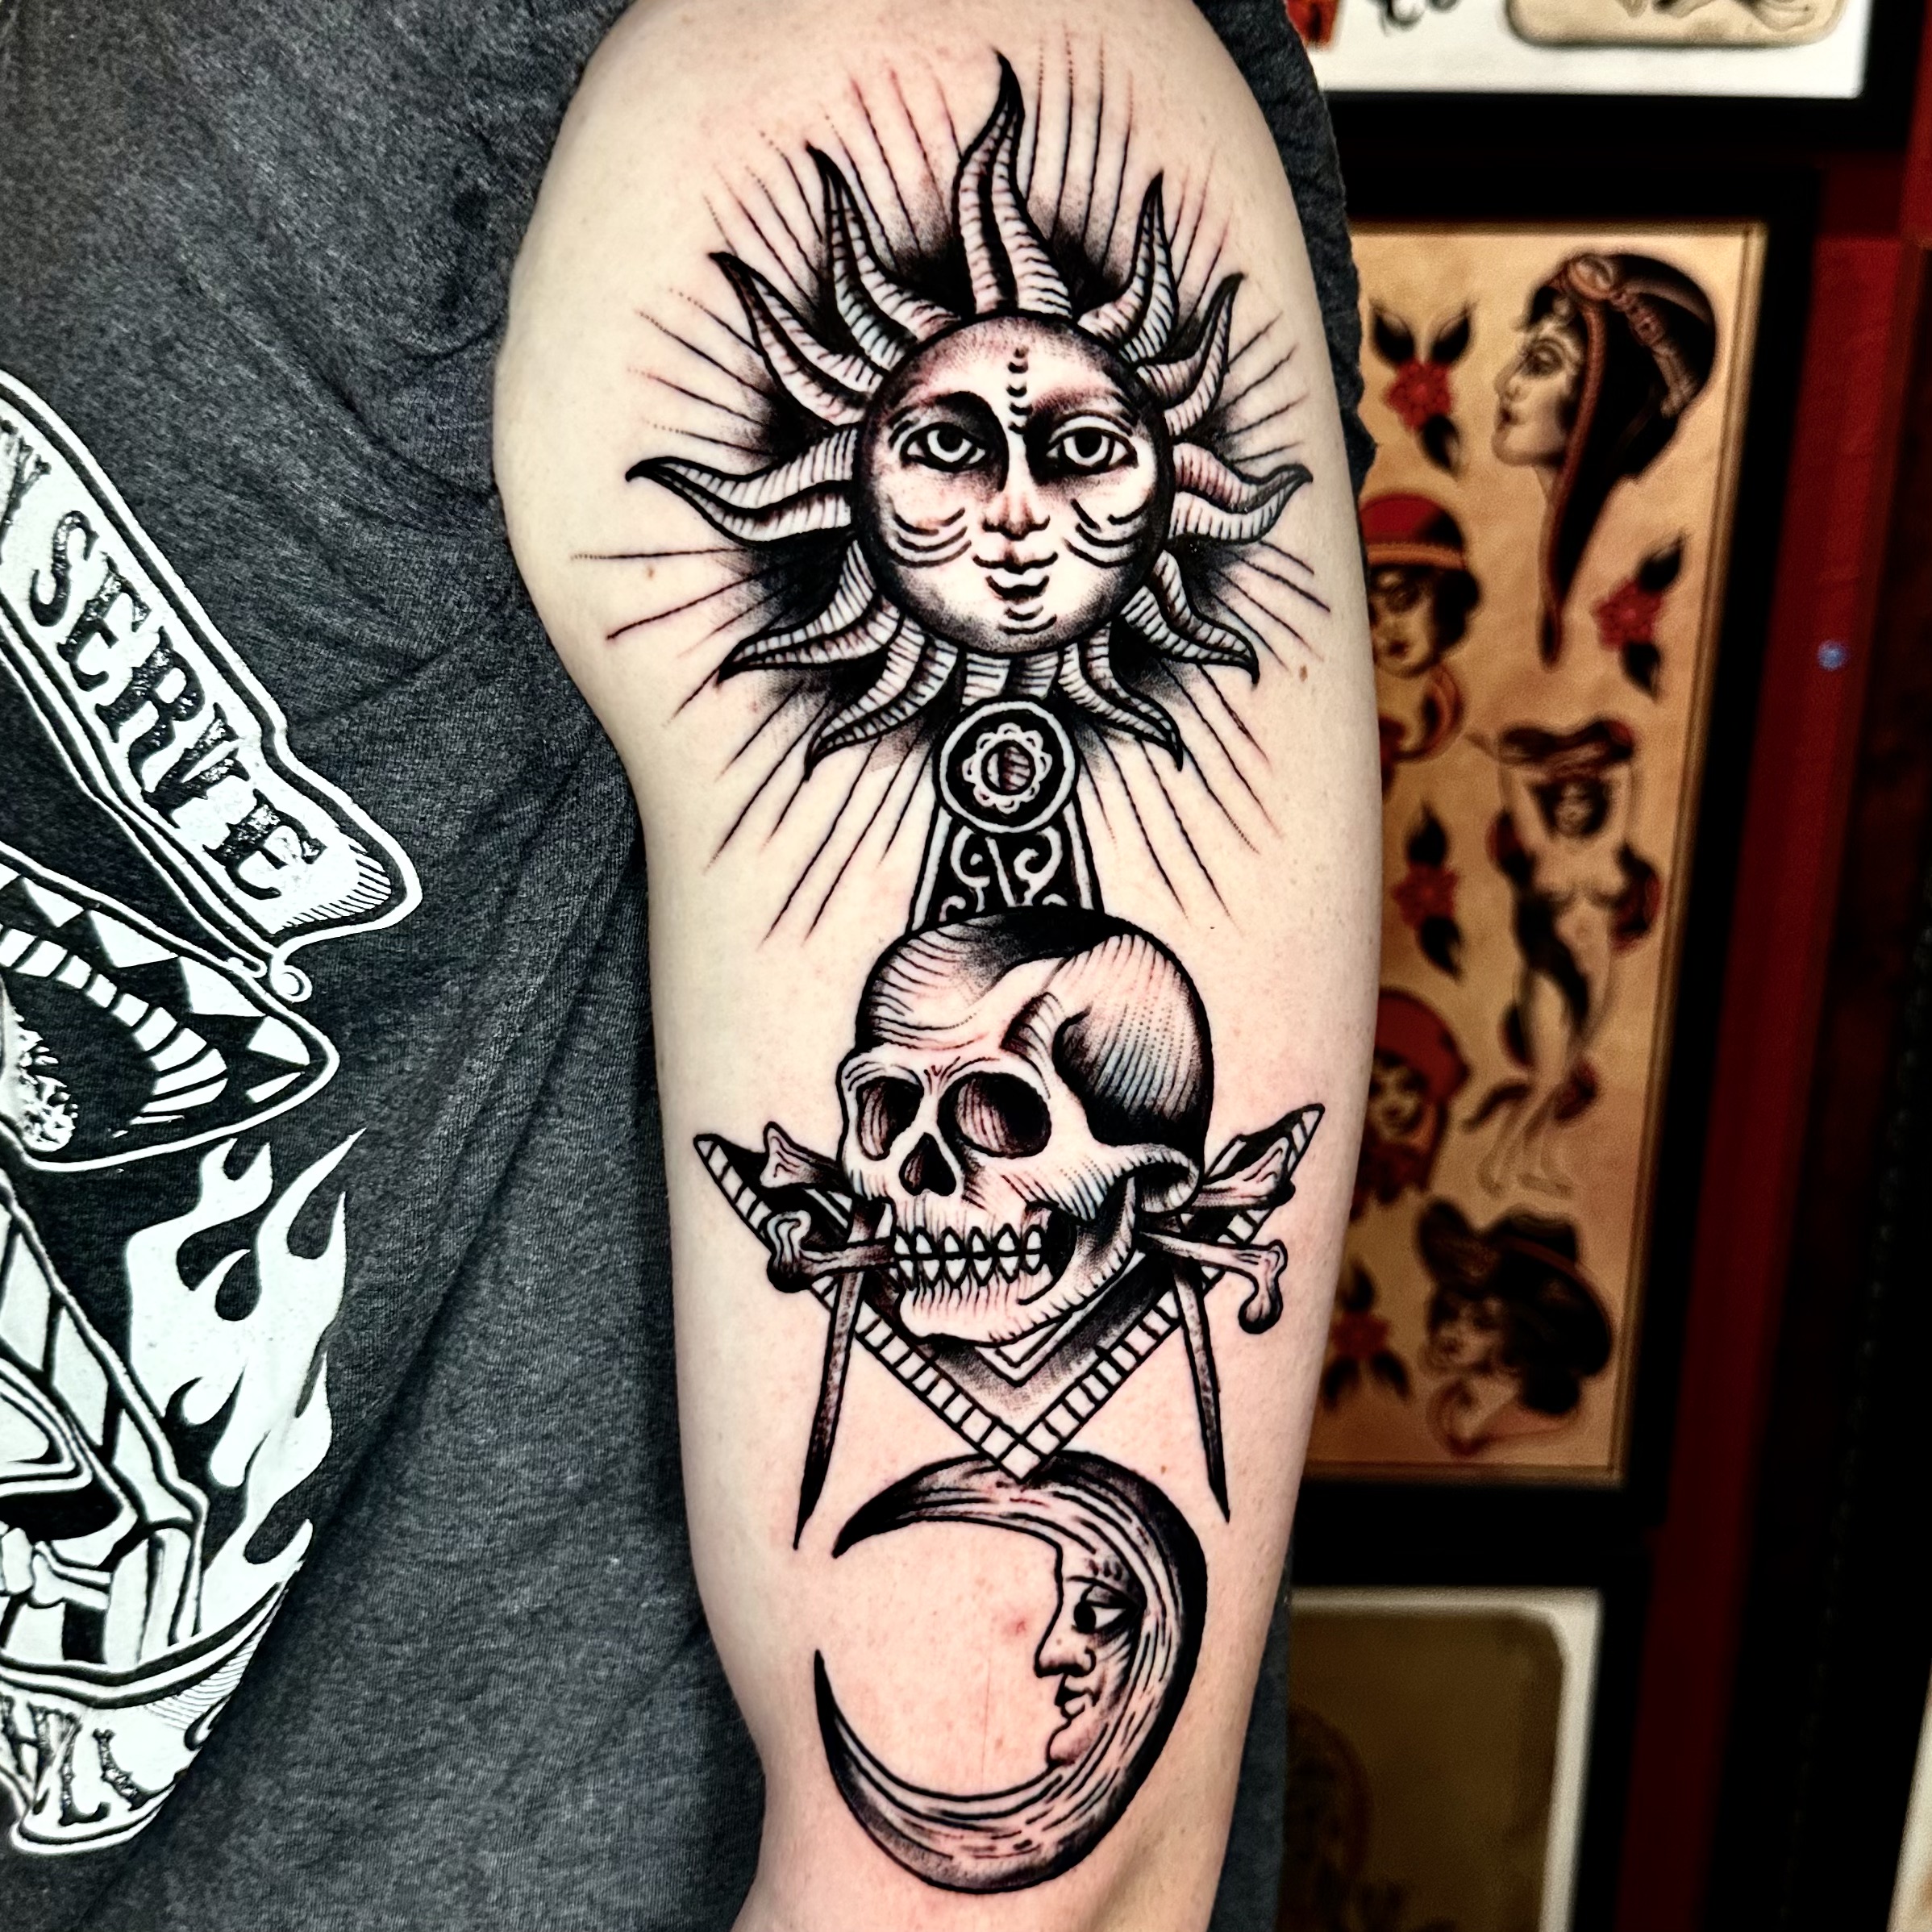 Tattoo of the sun, a skull, and the moon